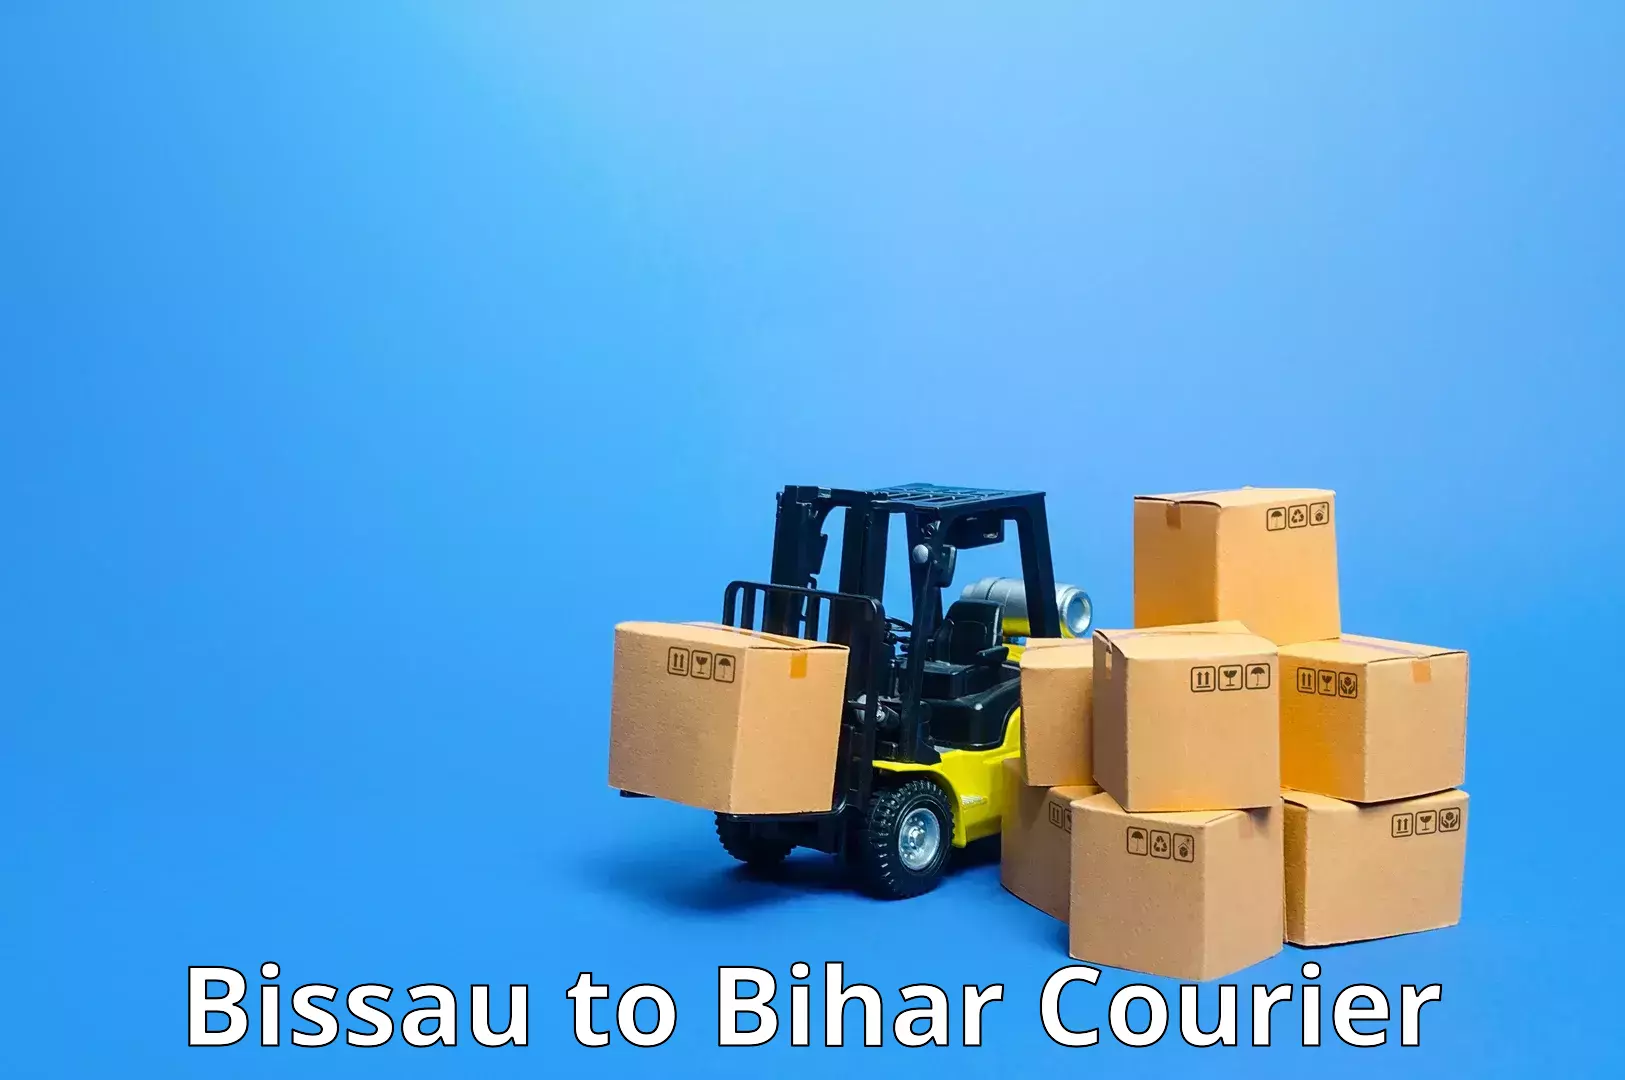 State-of-the-art courier technology Bissau to Bihar